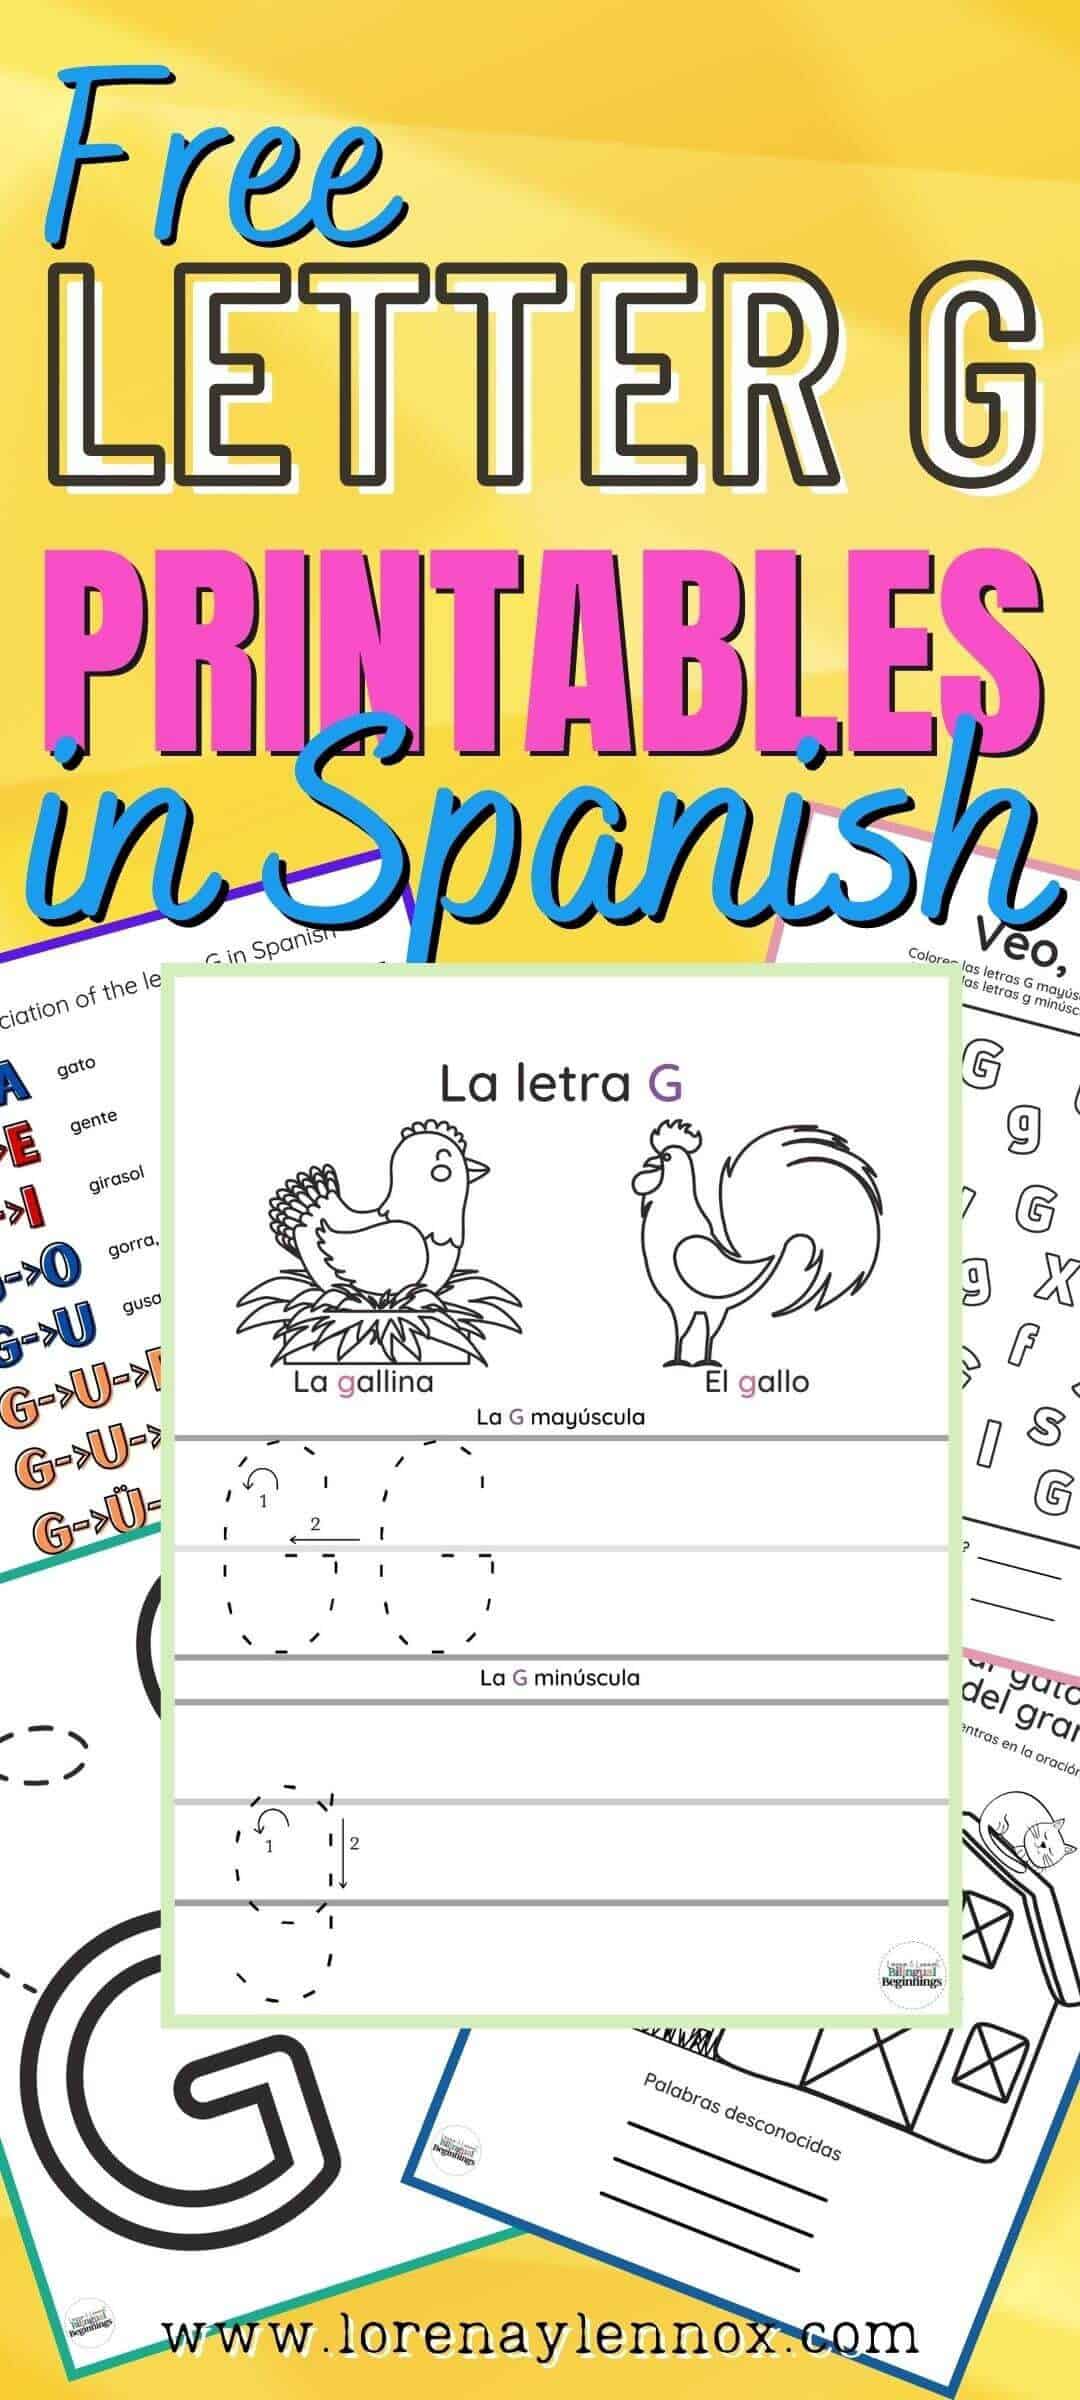 five    FREE letter G printable activities in Spanish    for children ages 3-6. These activities are perfect for the classroom or for fun at home! You can subscribe to get your FREE printable activities at the end of this post!